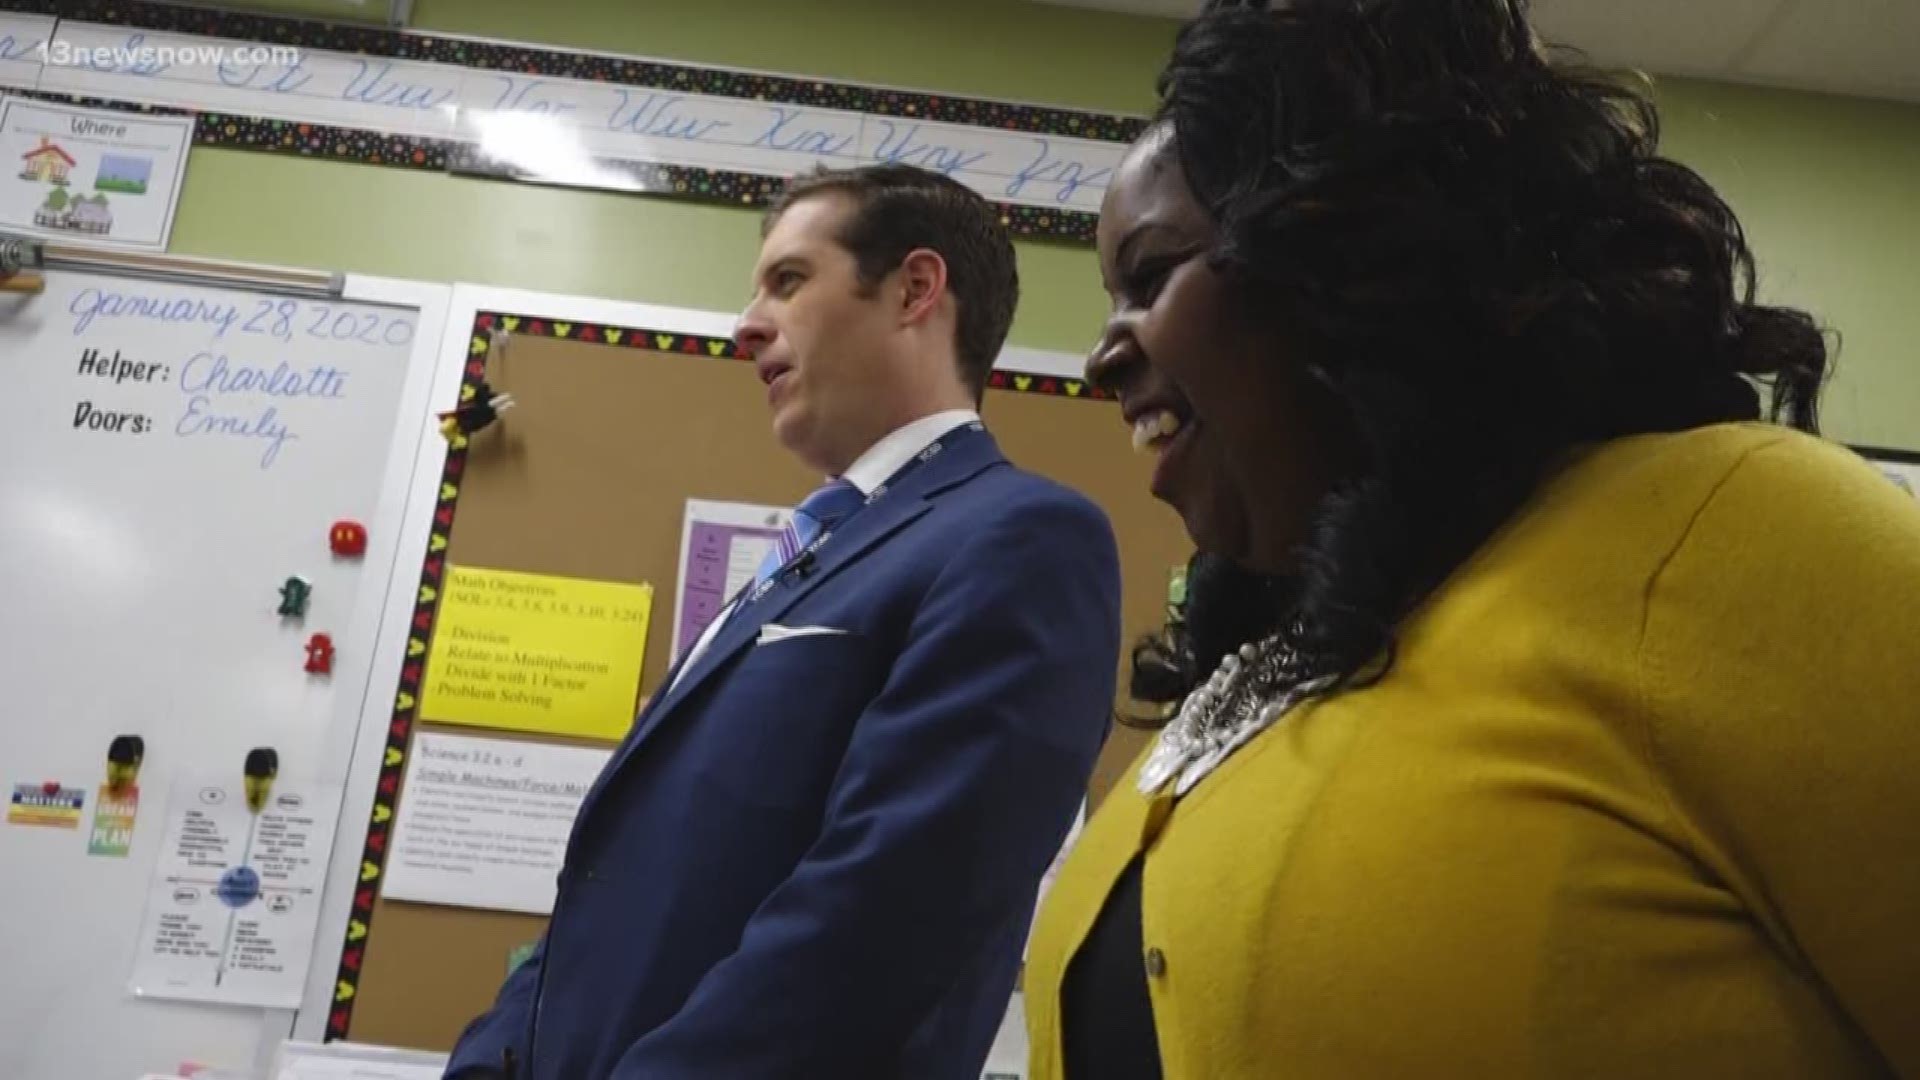 13News Now Dan Kennedy took on the challenge to be principal for a day at Waller Mill Elementary in Williamsburg.